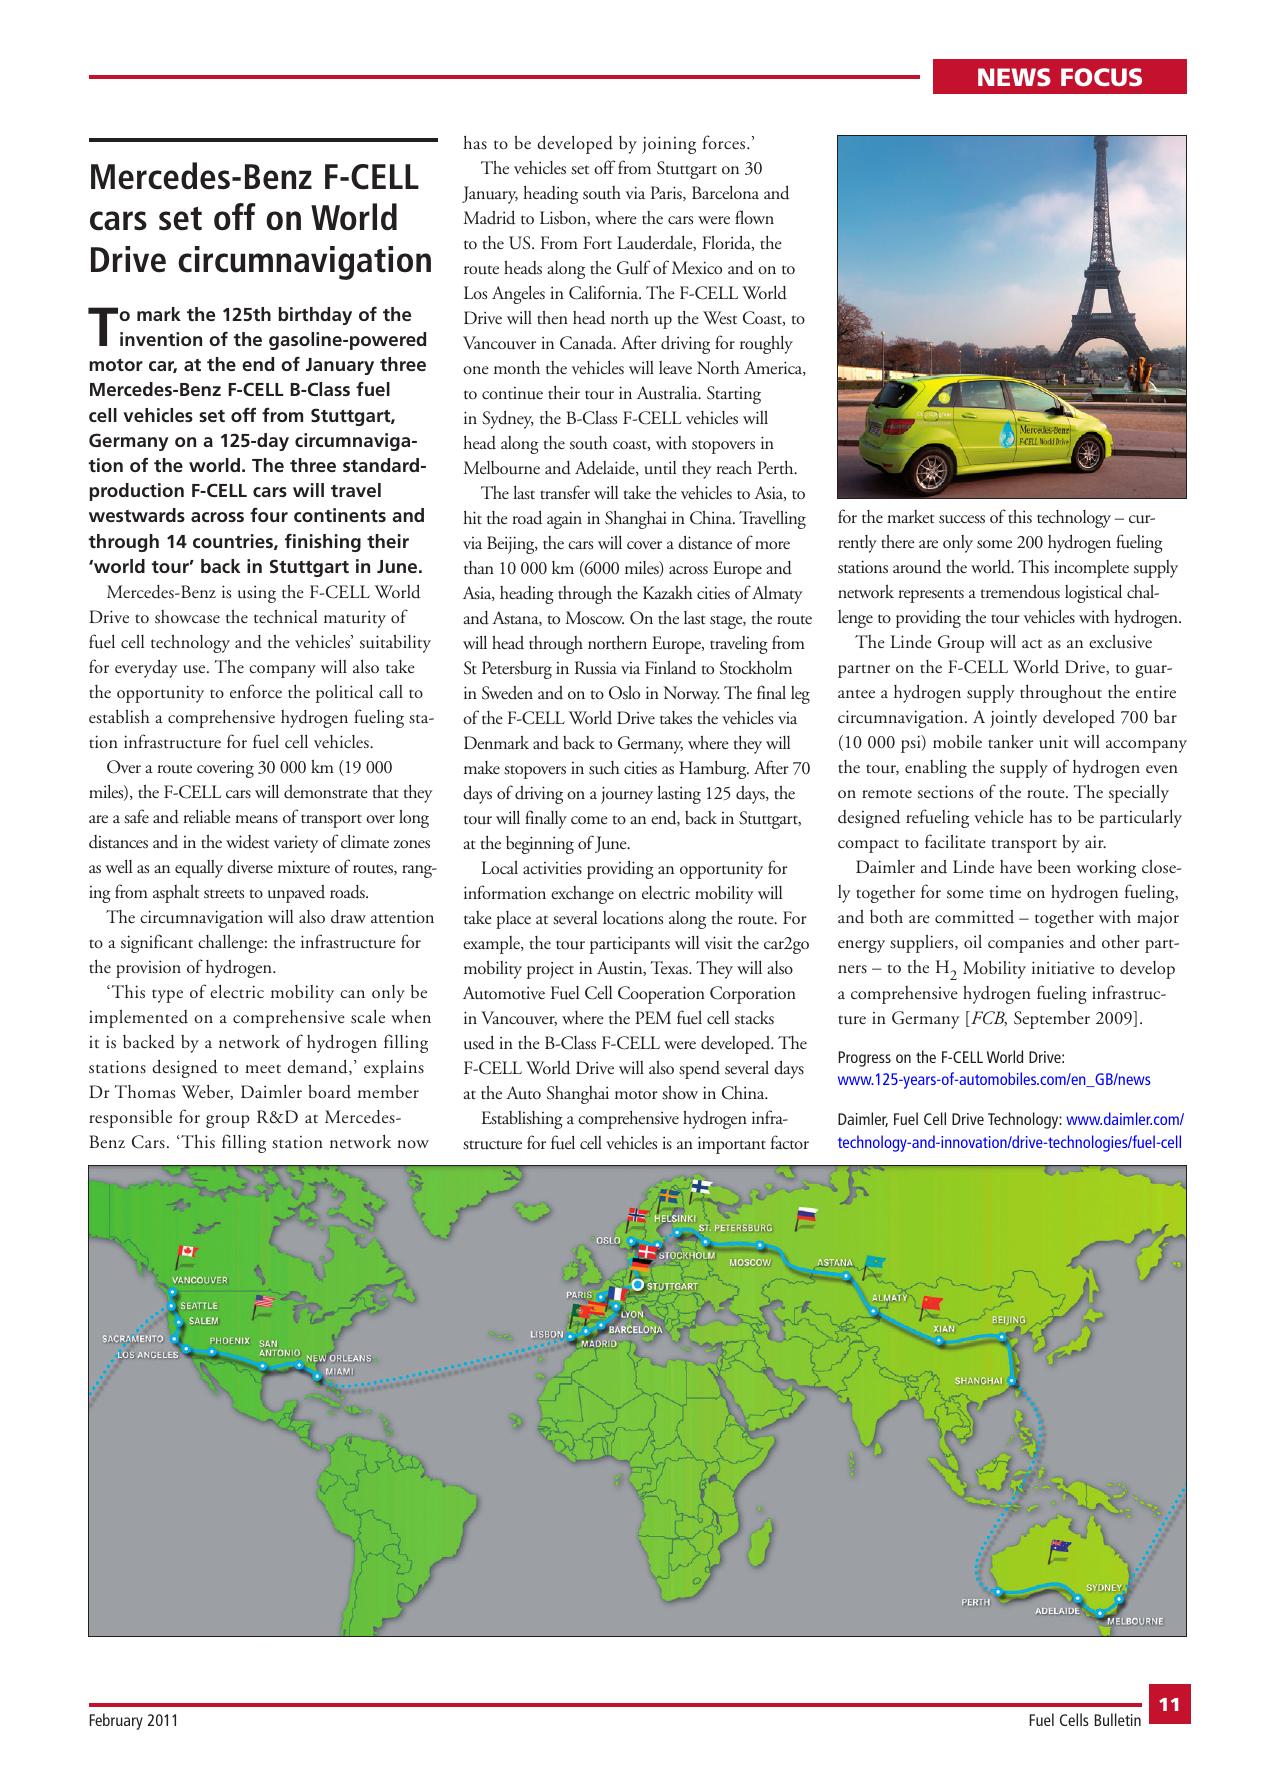 Mercedes-Benz F-CELL cars set off on World Drive circumnavigation by Unknown